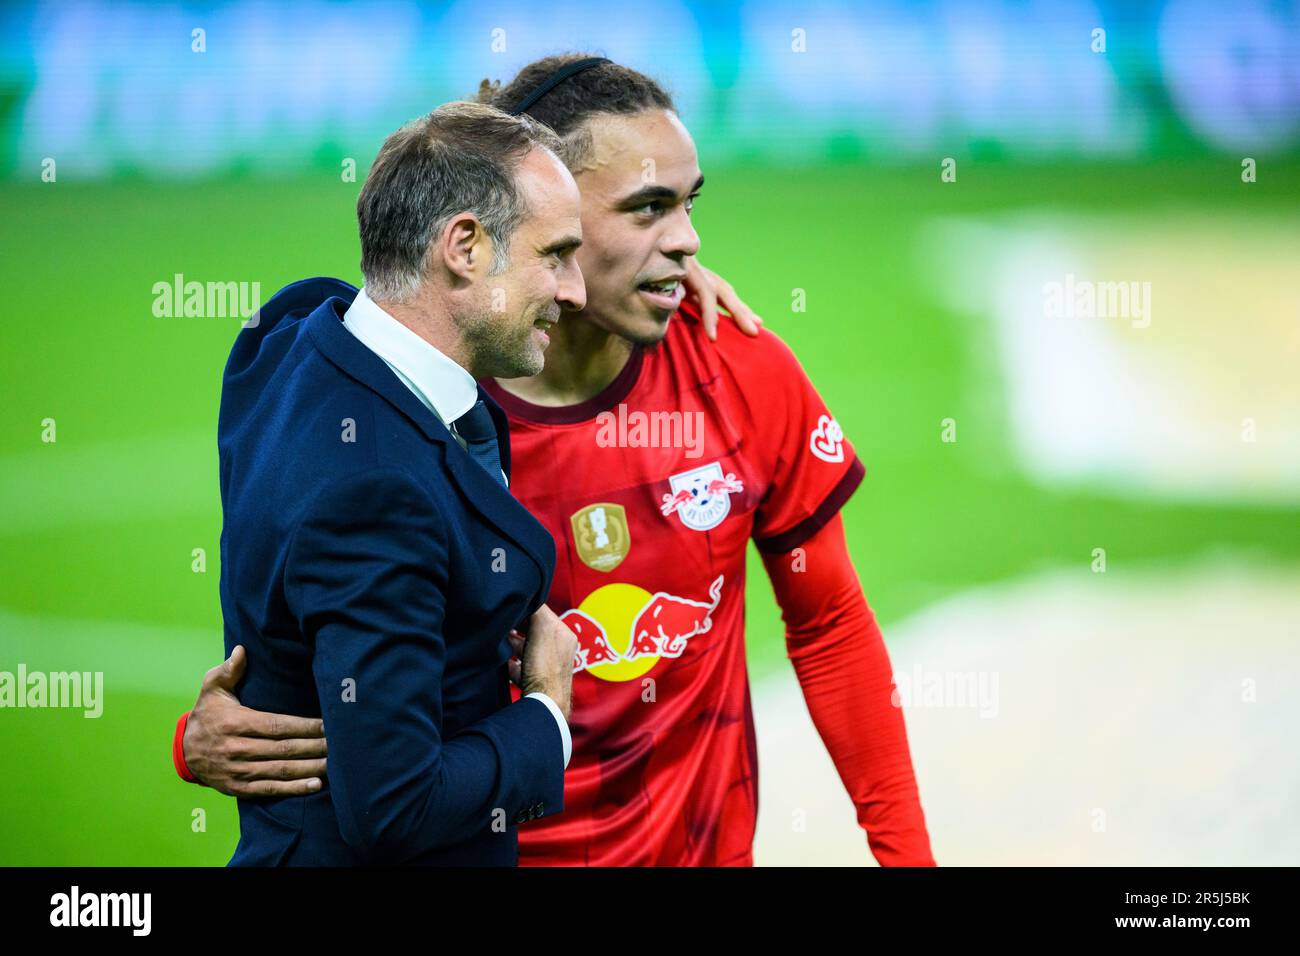 Berlin, Germany. 03rd June, 2023. Soccer: DFB Cup, RB Leipzig - Eintracht Frankfurt, Final, Olympiastadion. Oliver Mintzlaff (l), Managing Director, Red Bull GmbH, cheers with Leipzig's Yussuf Poulsen (r) after the match. Credit: Tom Weller/dpa - IMPORTANT NOTE: In accordance with the requirements of the DFL Deutsche Fußball Liga and the DFB Deutscher Fußball-Bund, it is prohibited to use or have used photographs taken in the stadium and/or of the match in the form of sequence pictures and/or video-like photo series./dpa/Alamy Live News Stock Photo